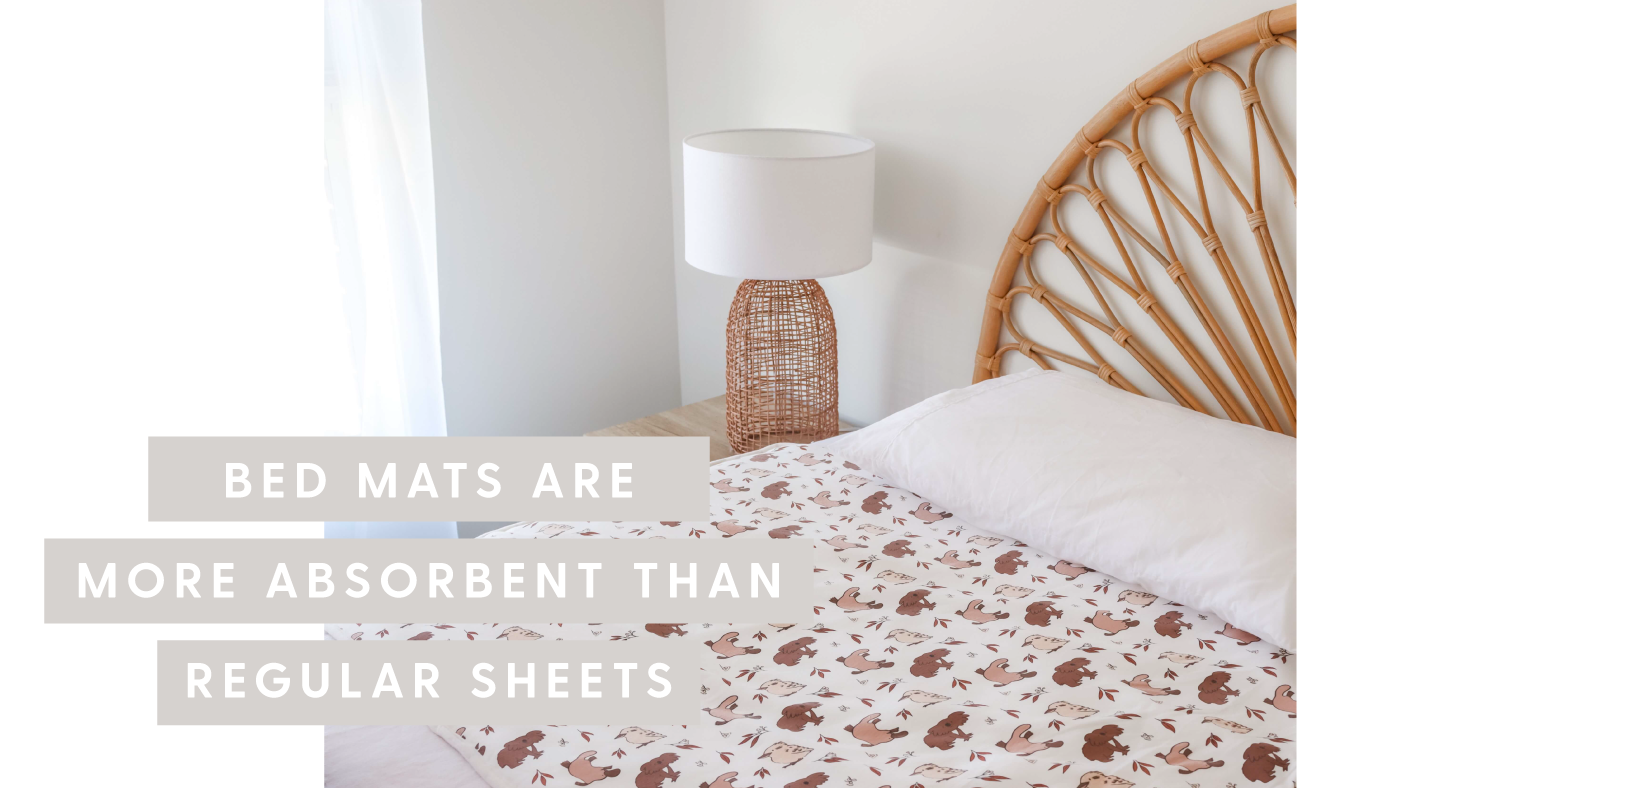 bedwetting mats are more absorbent than regular sheets